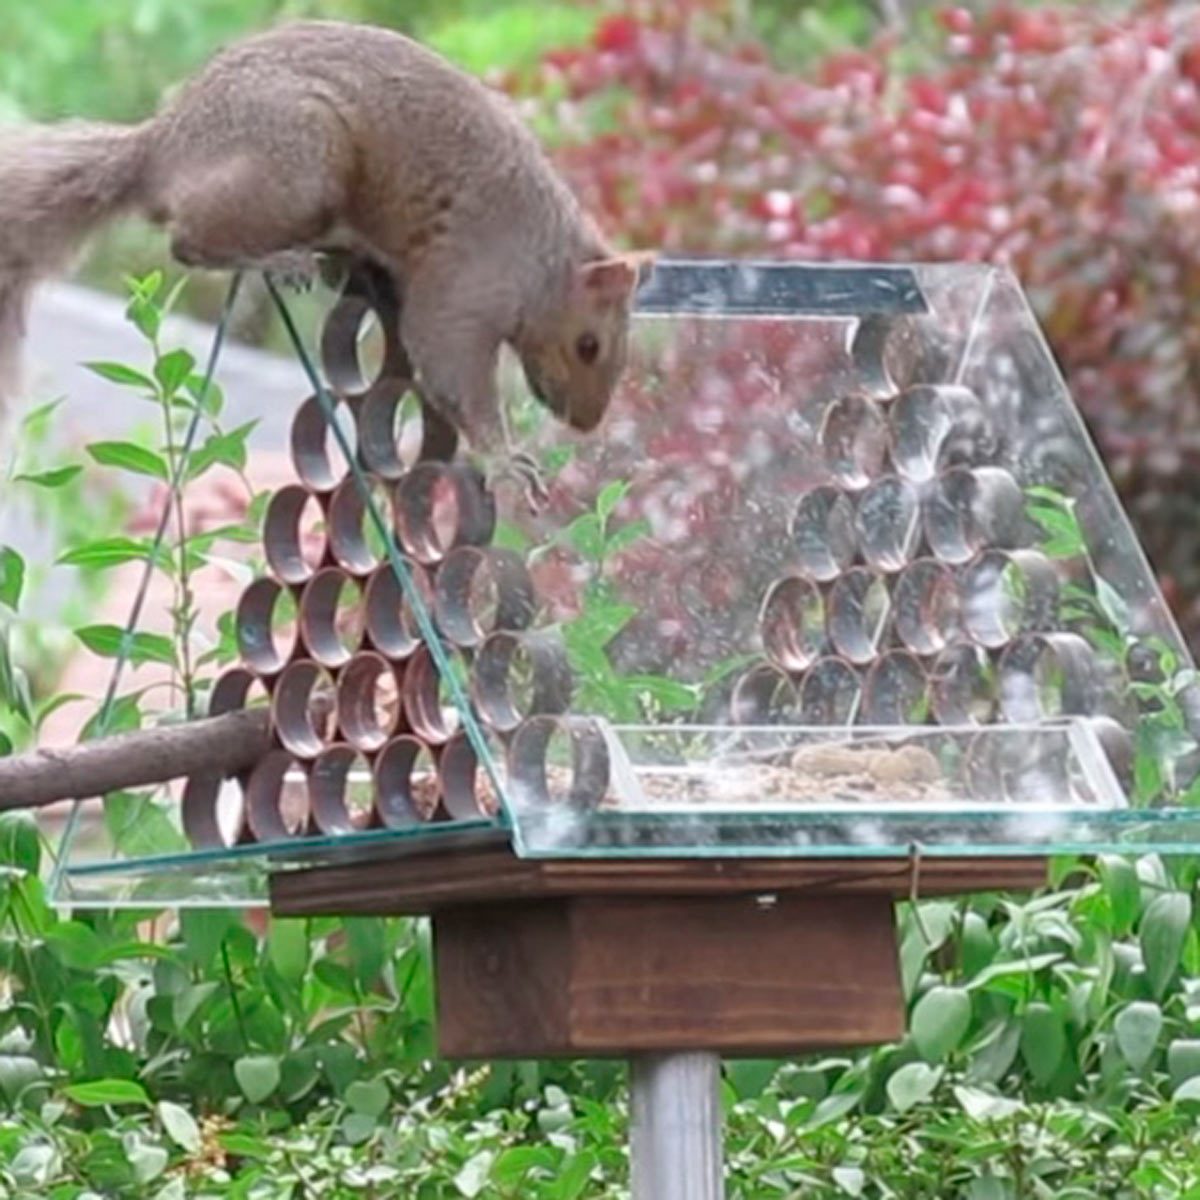 10 Ways To Prevent Squirrels From Reaching Birdseed